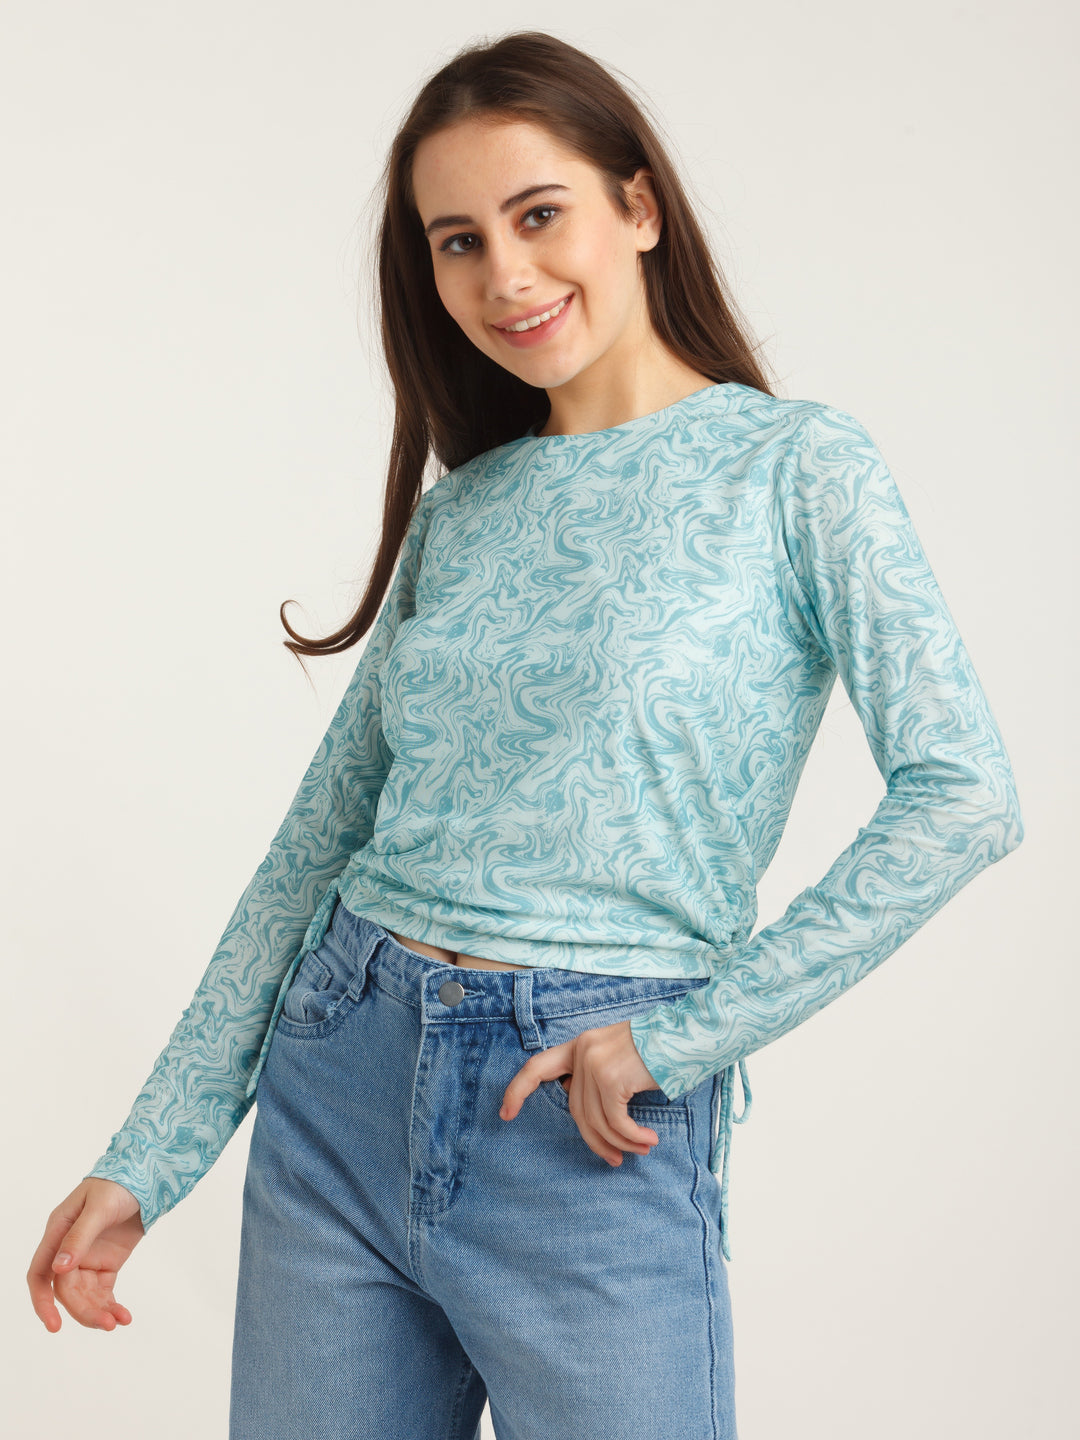 Blue Printed Tie-Up Top For Women